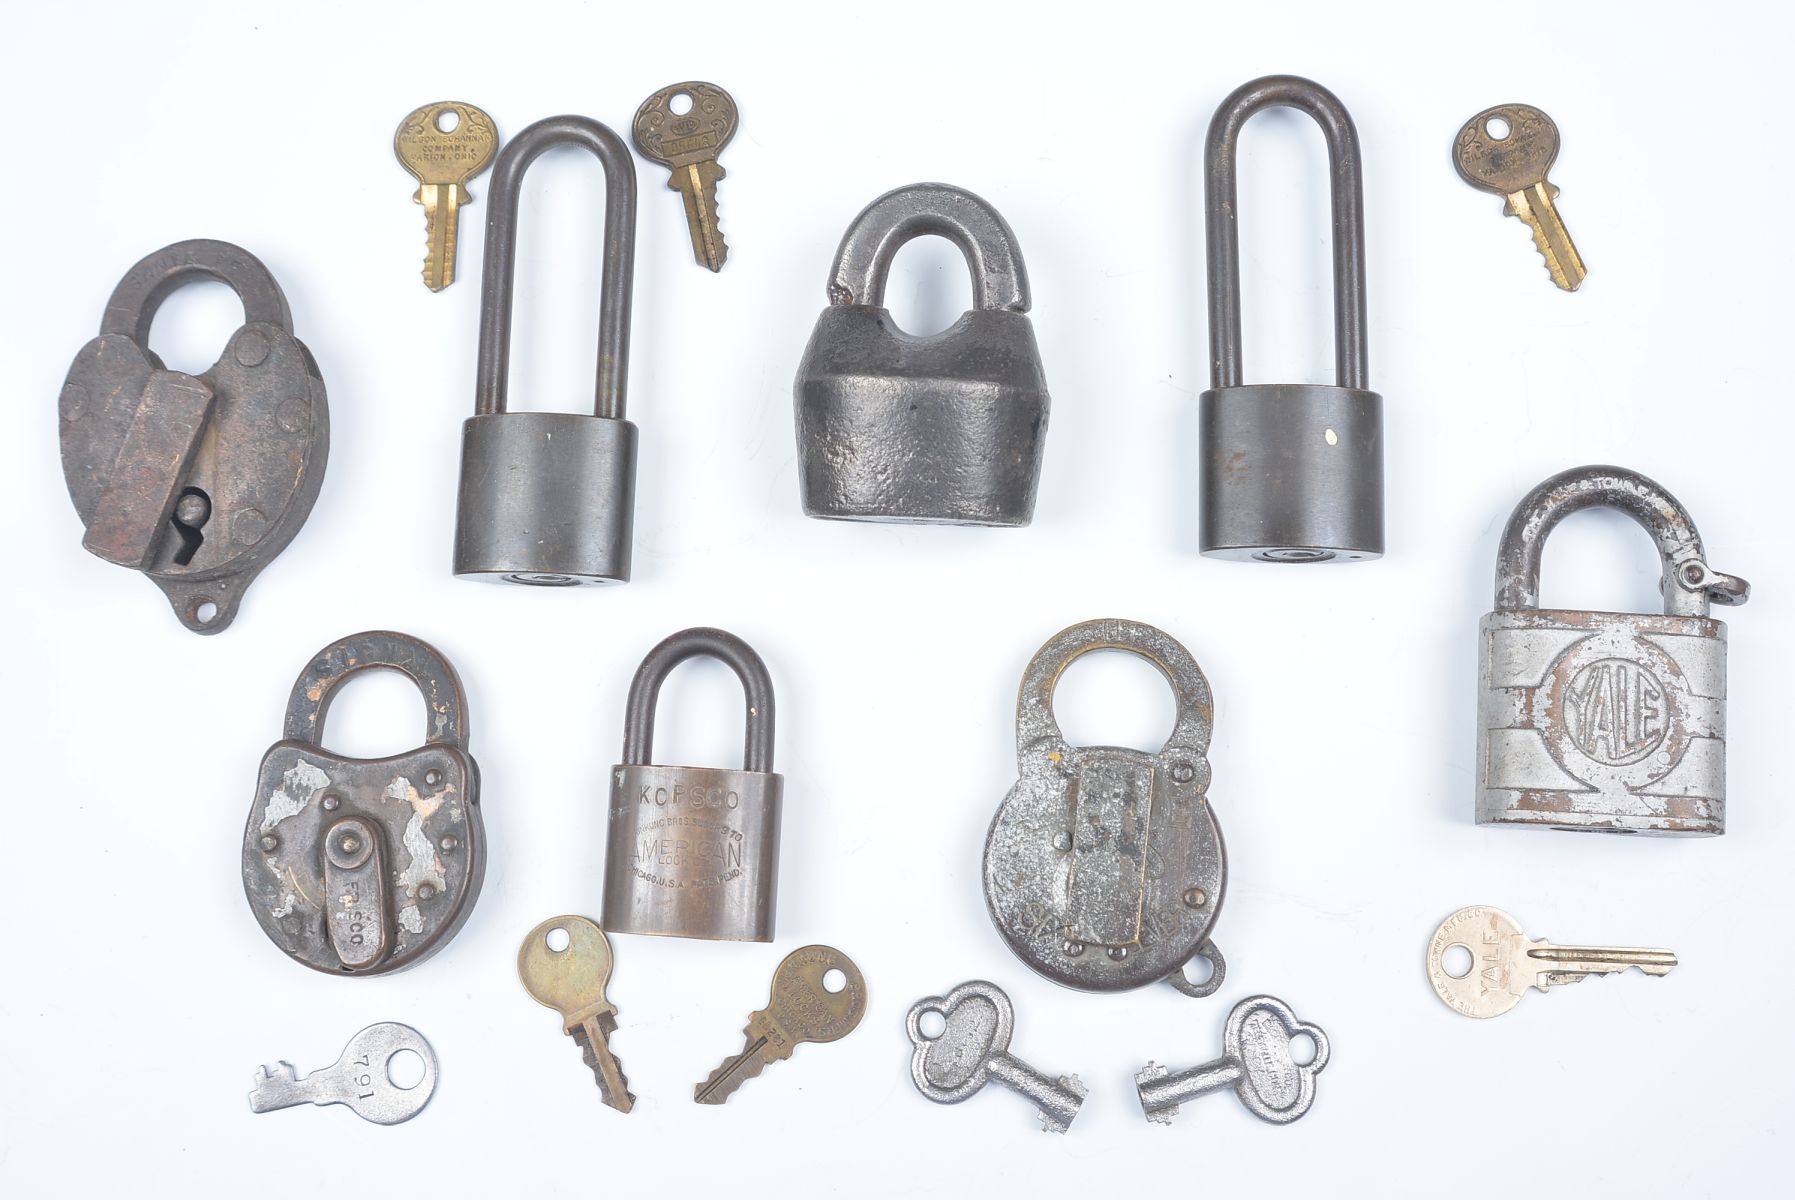 EIGHT PADLOCKS WITH VARIOUS RAILROAD REPORTING MARKS